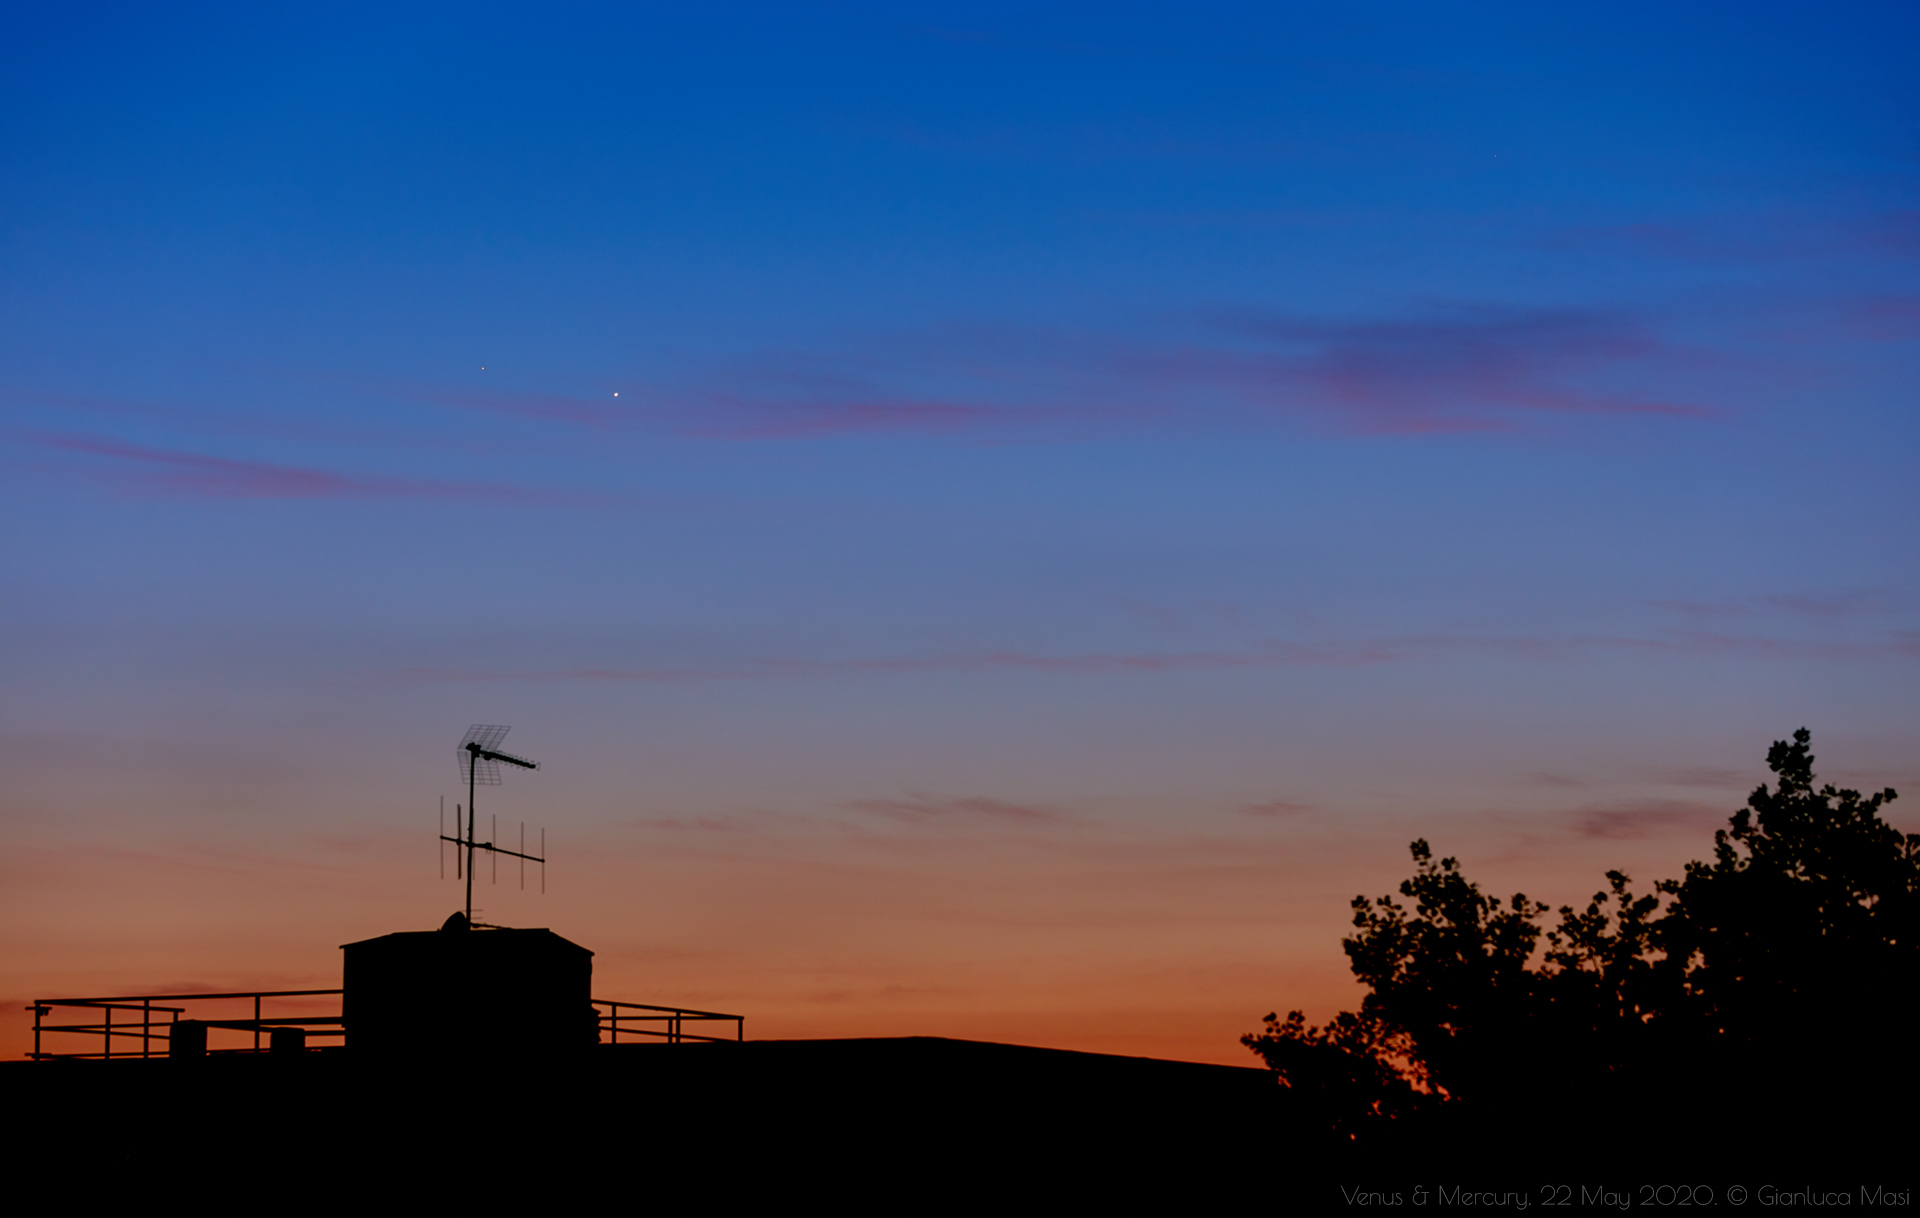 Venus and Mercury shine in the glory of the sunset - 22 May 2020.